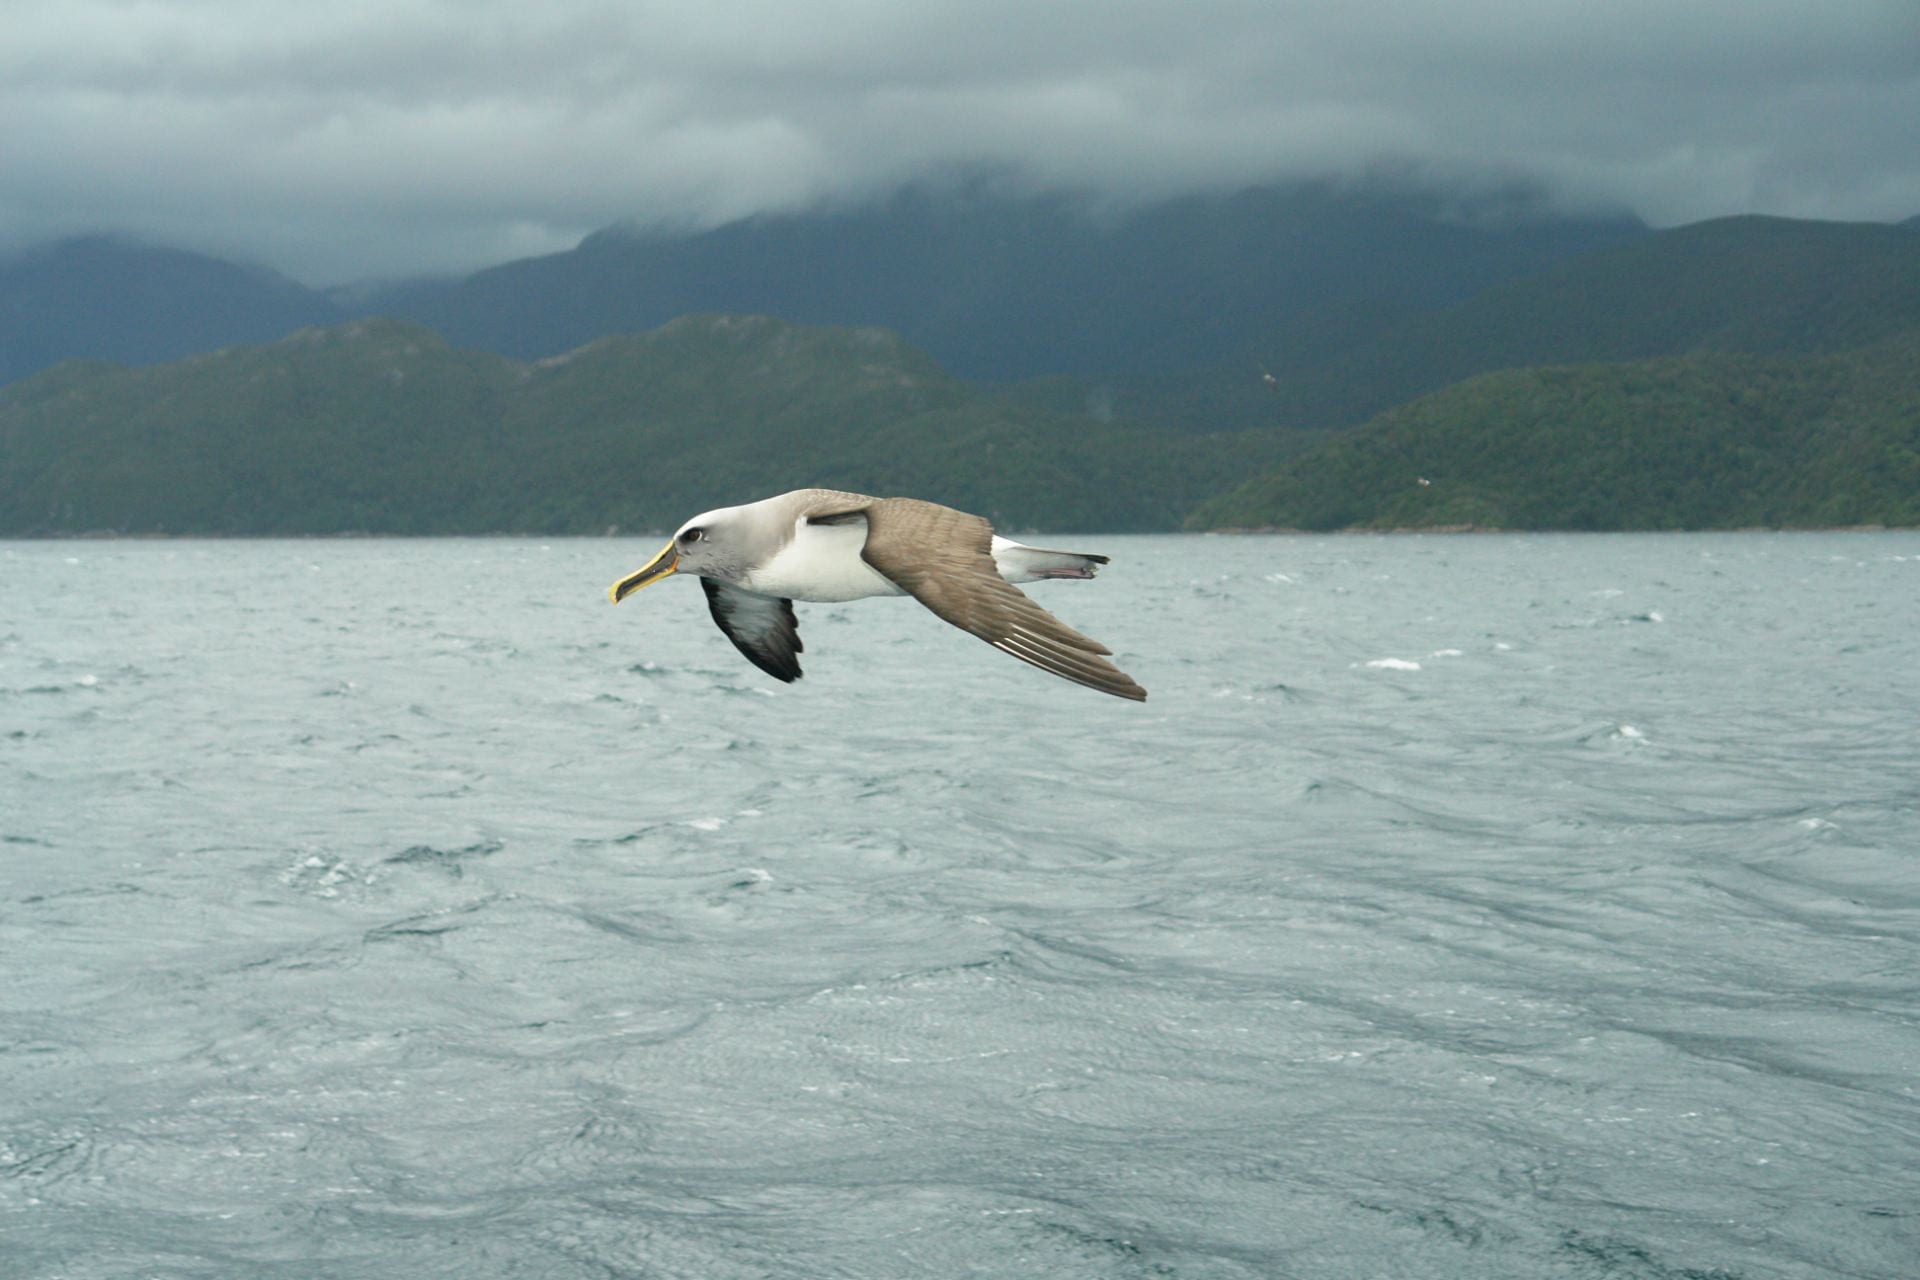 Albatross flying above the sea with bush-clad mountains and low cloud in the background